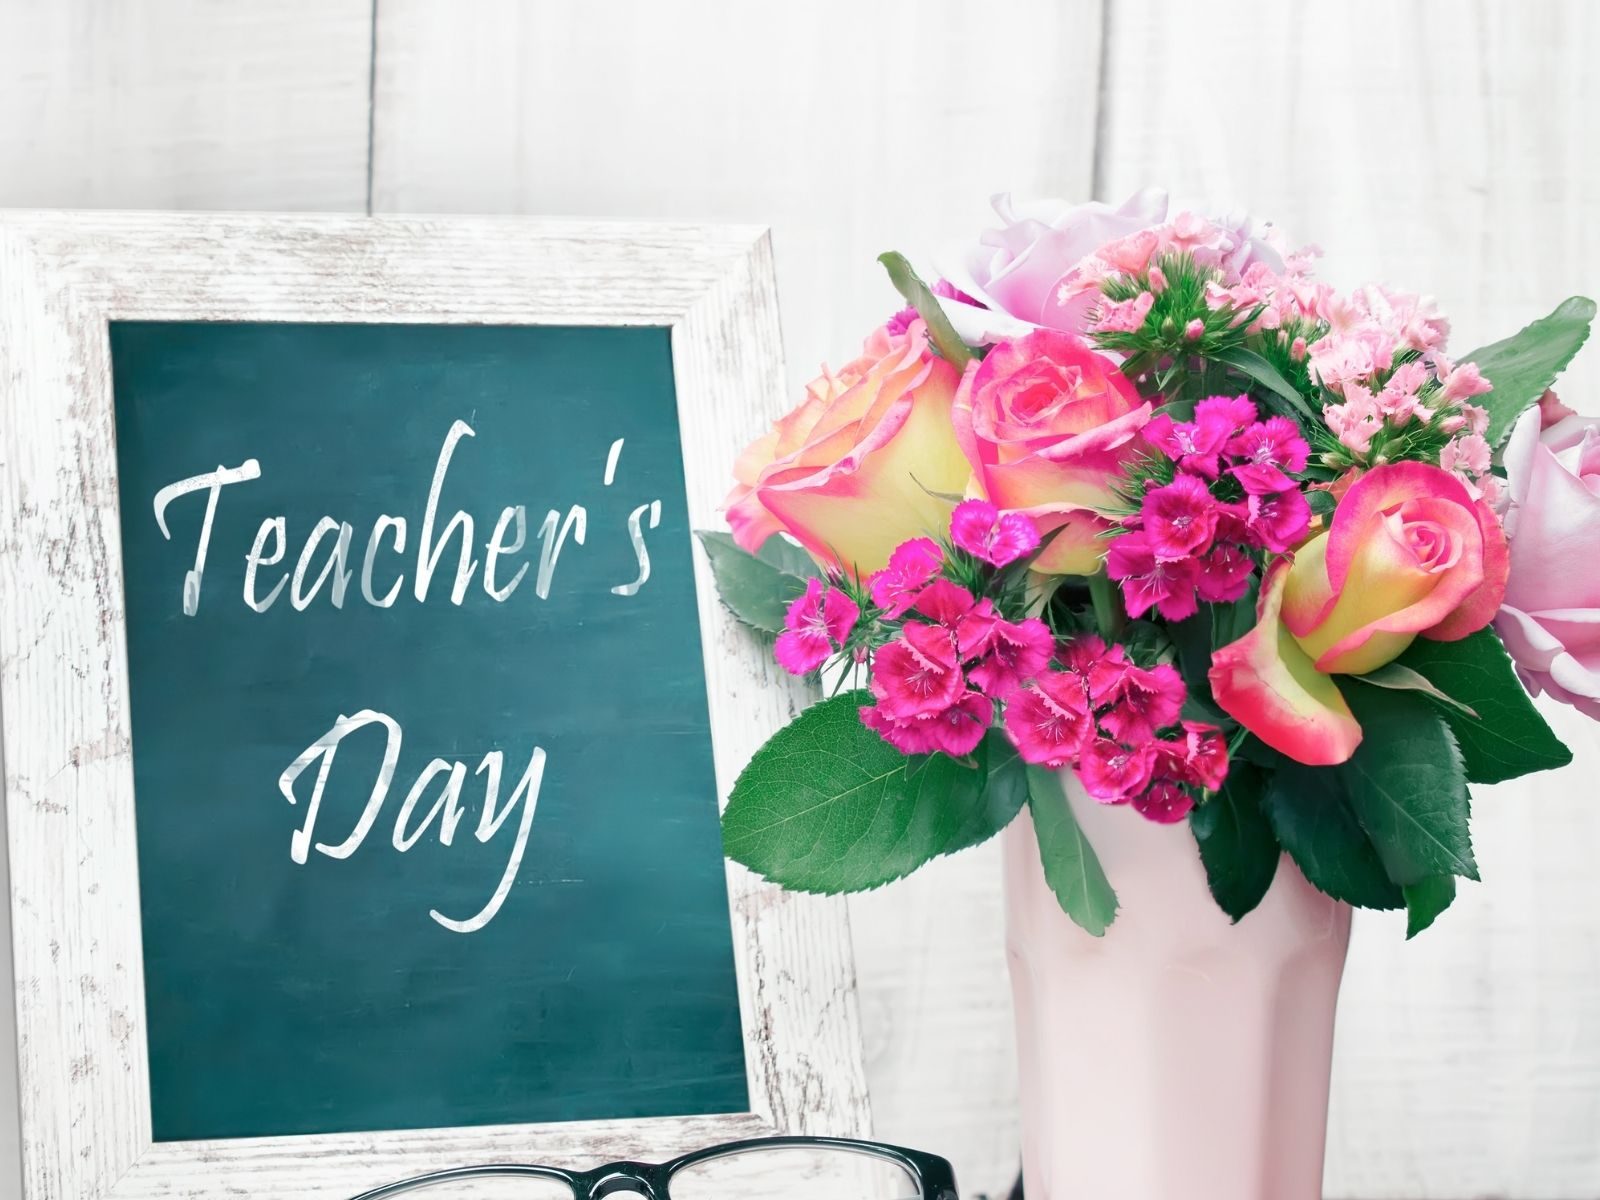 Happy Teachers' Day 2021: Wishes, Images, and Quotes to Share with your  Teachers